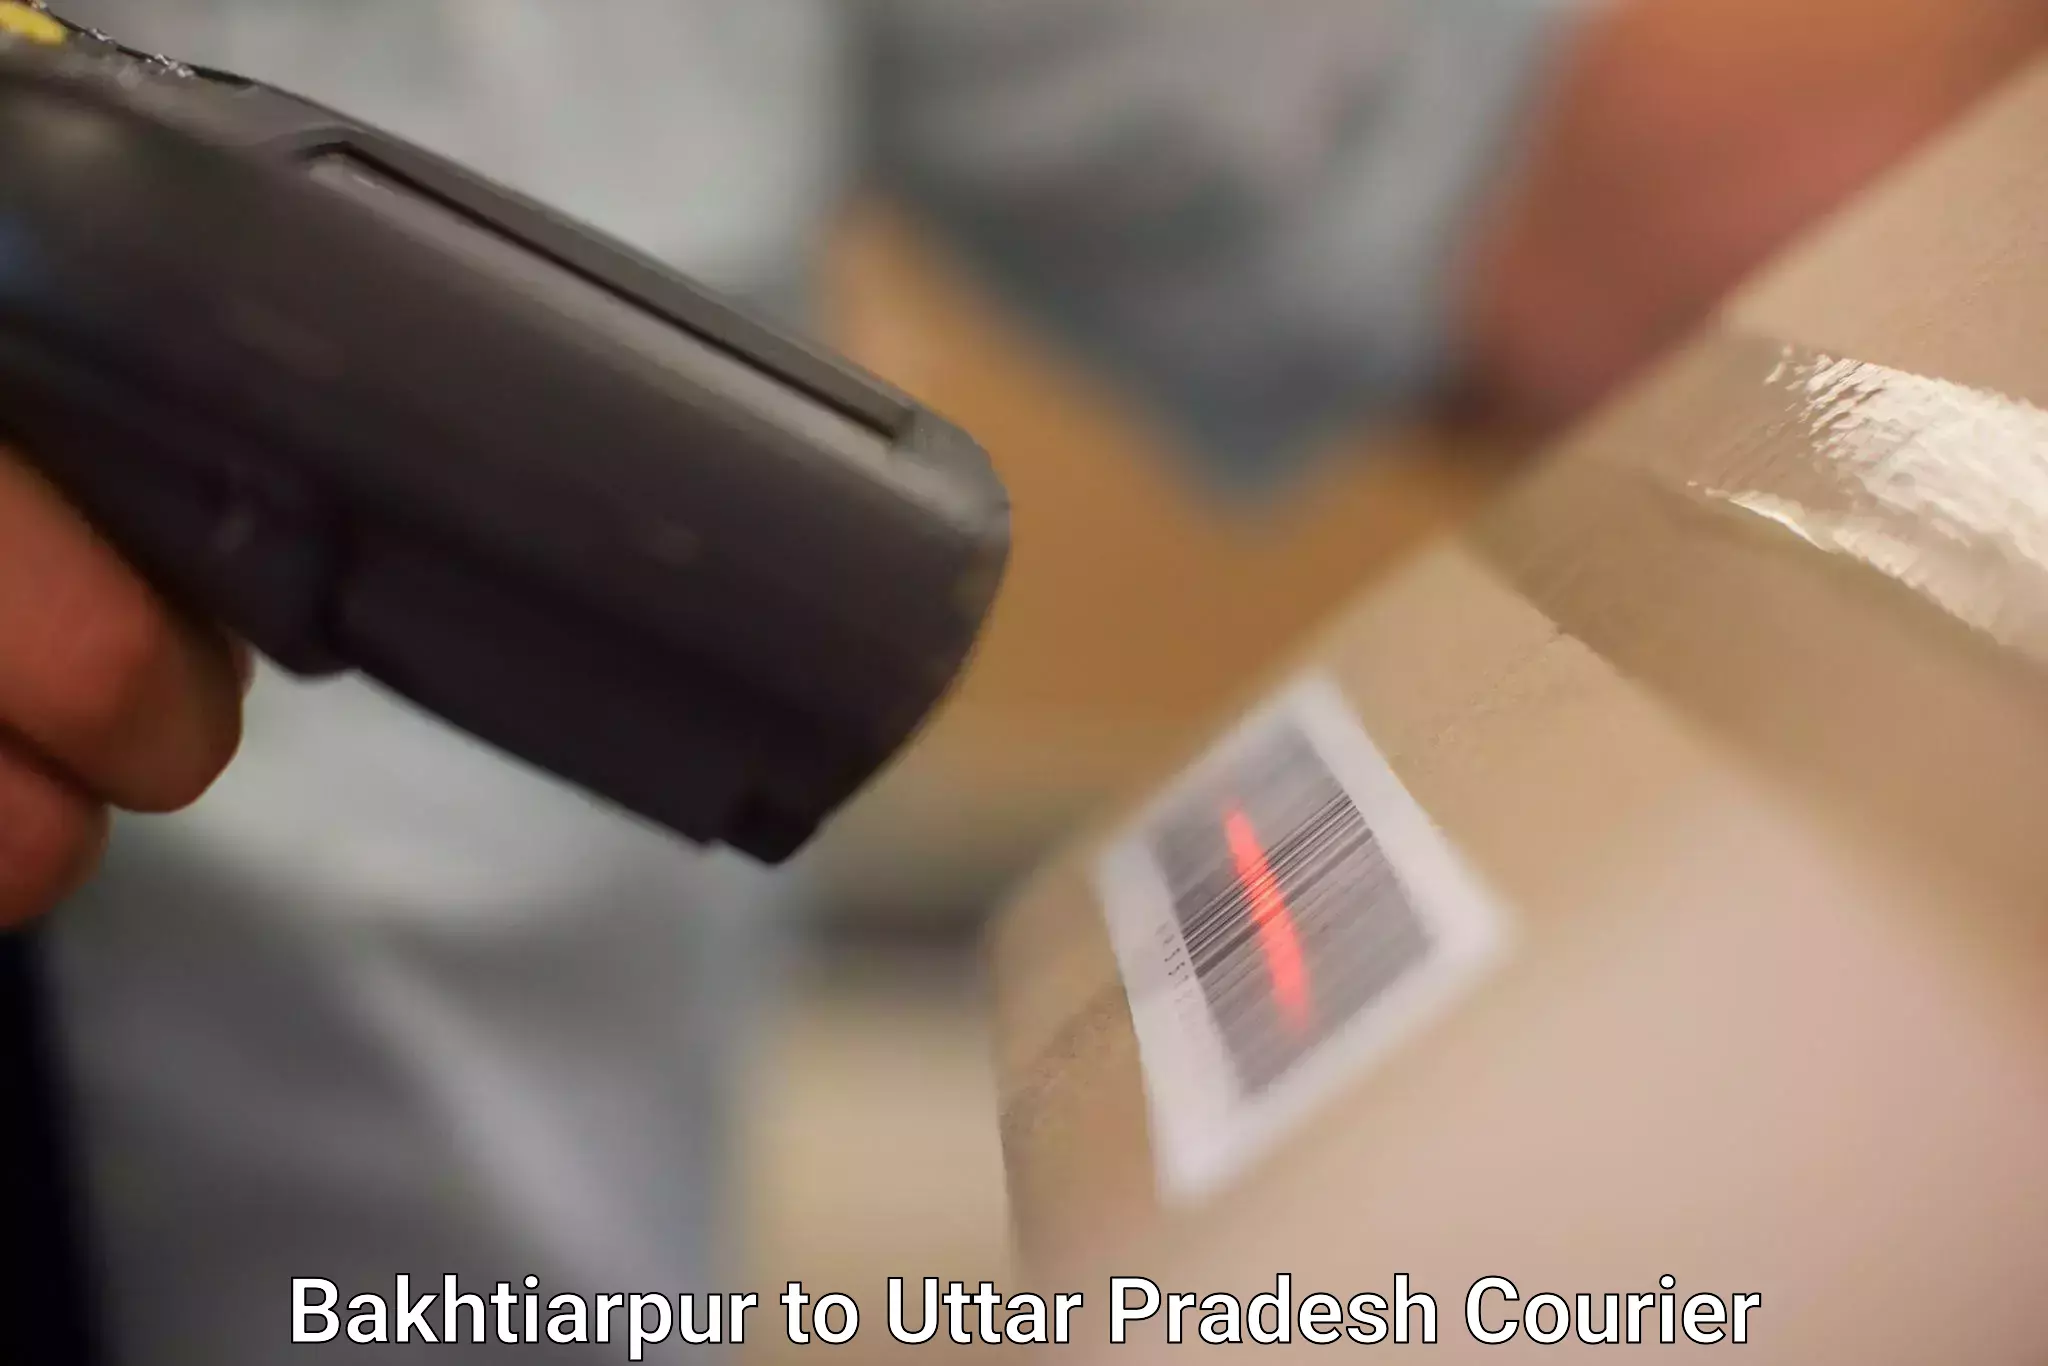 Express postal services in Bakhtiarpur to Lucknow